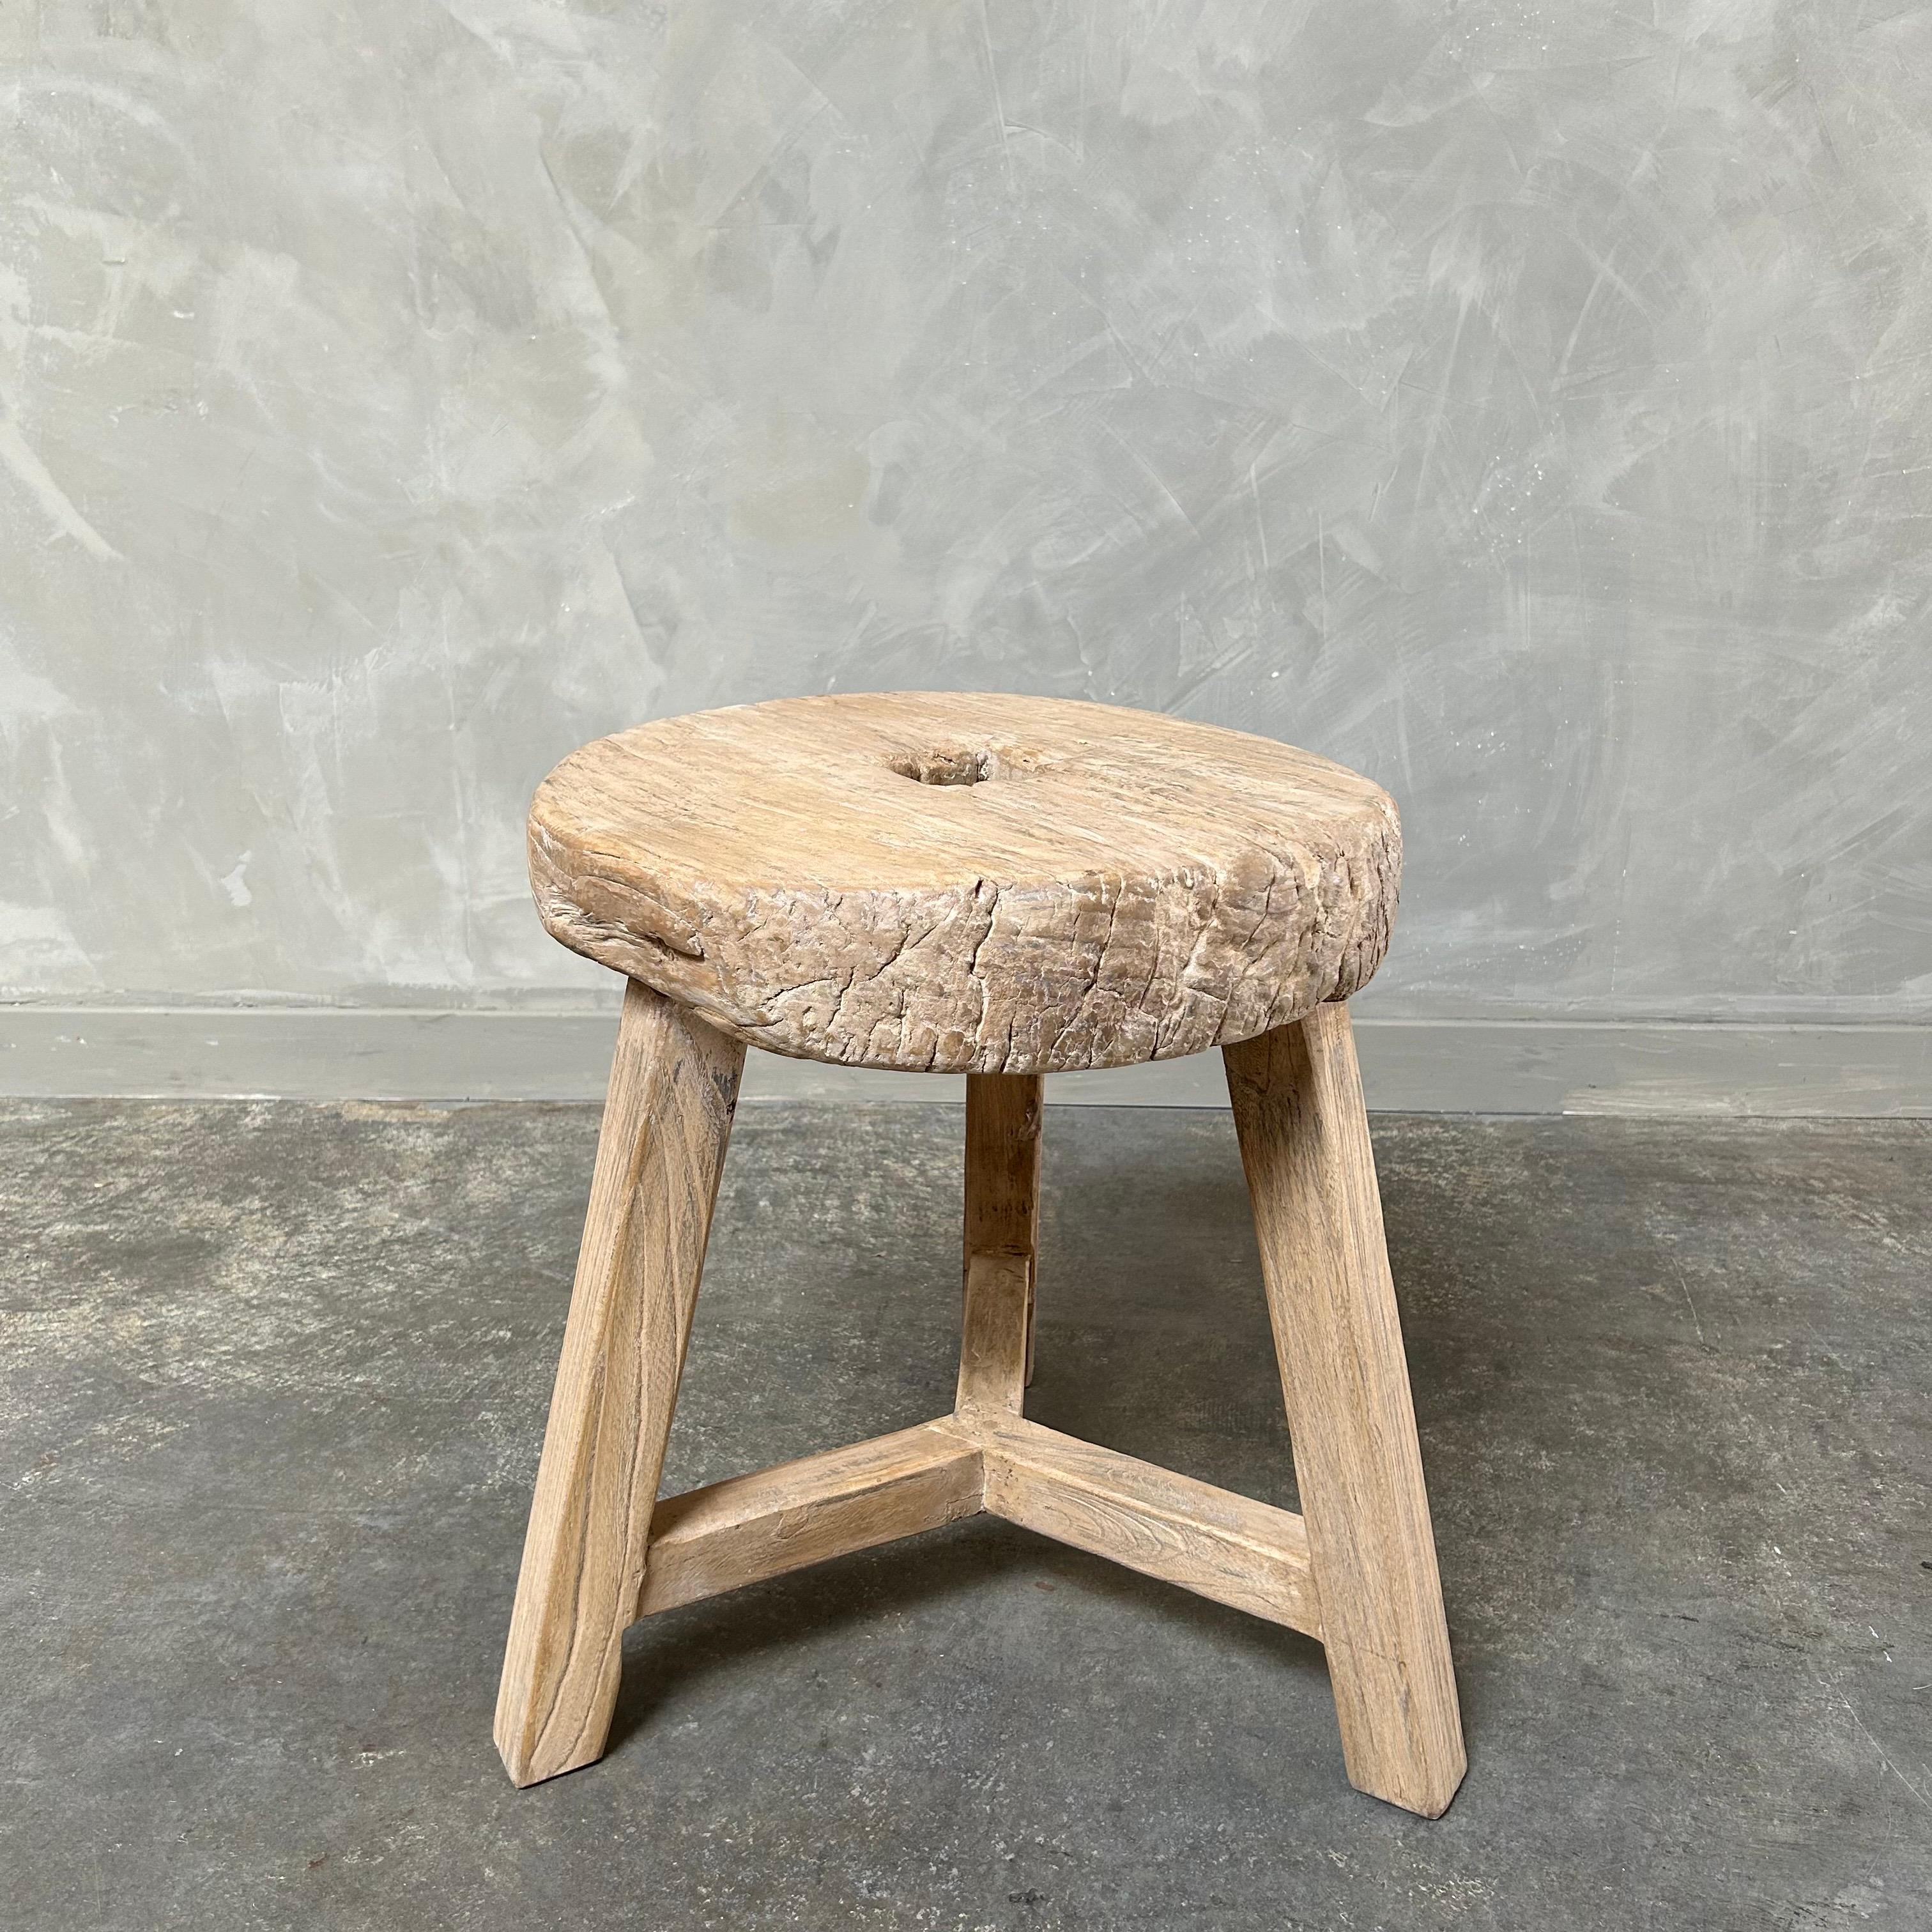 Antique wheel side table. This vintage elm wood wheel table is finished with medium to dark stain. The table is solid and sturdy ready for everyday use. Use as a side table, stool, powder room to add vintage style to your home. One of a kind